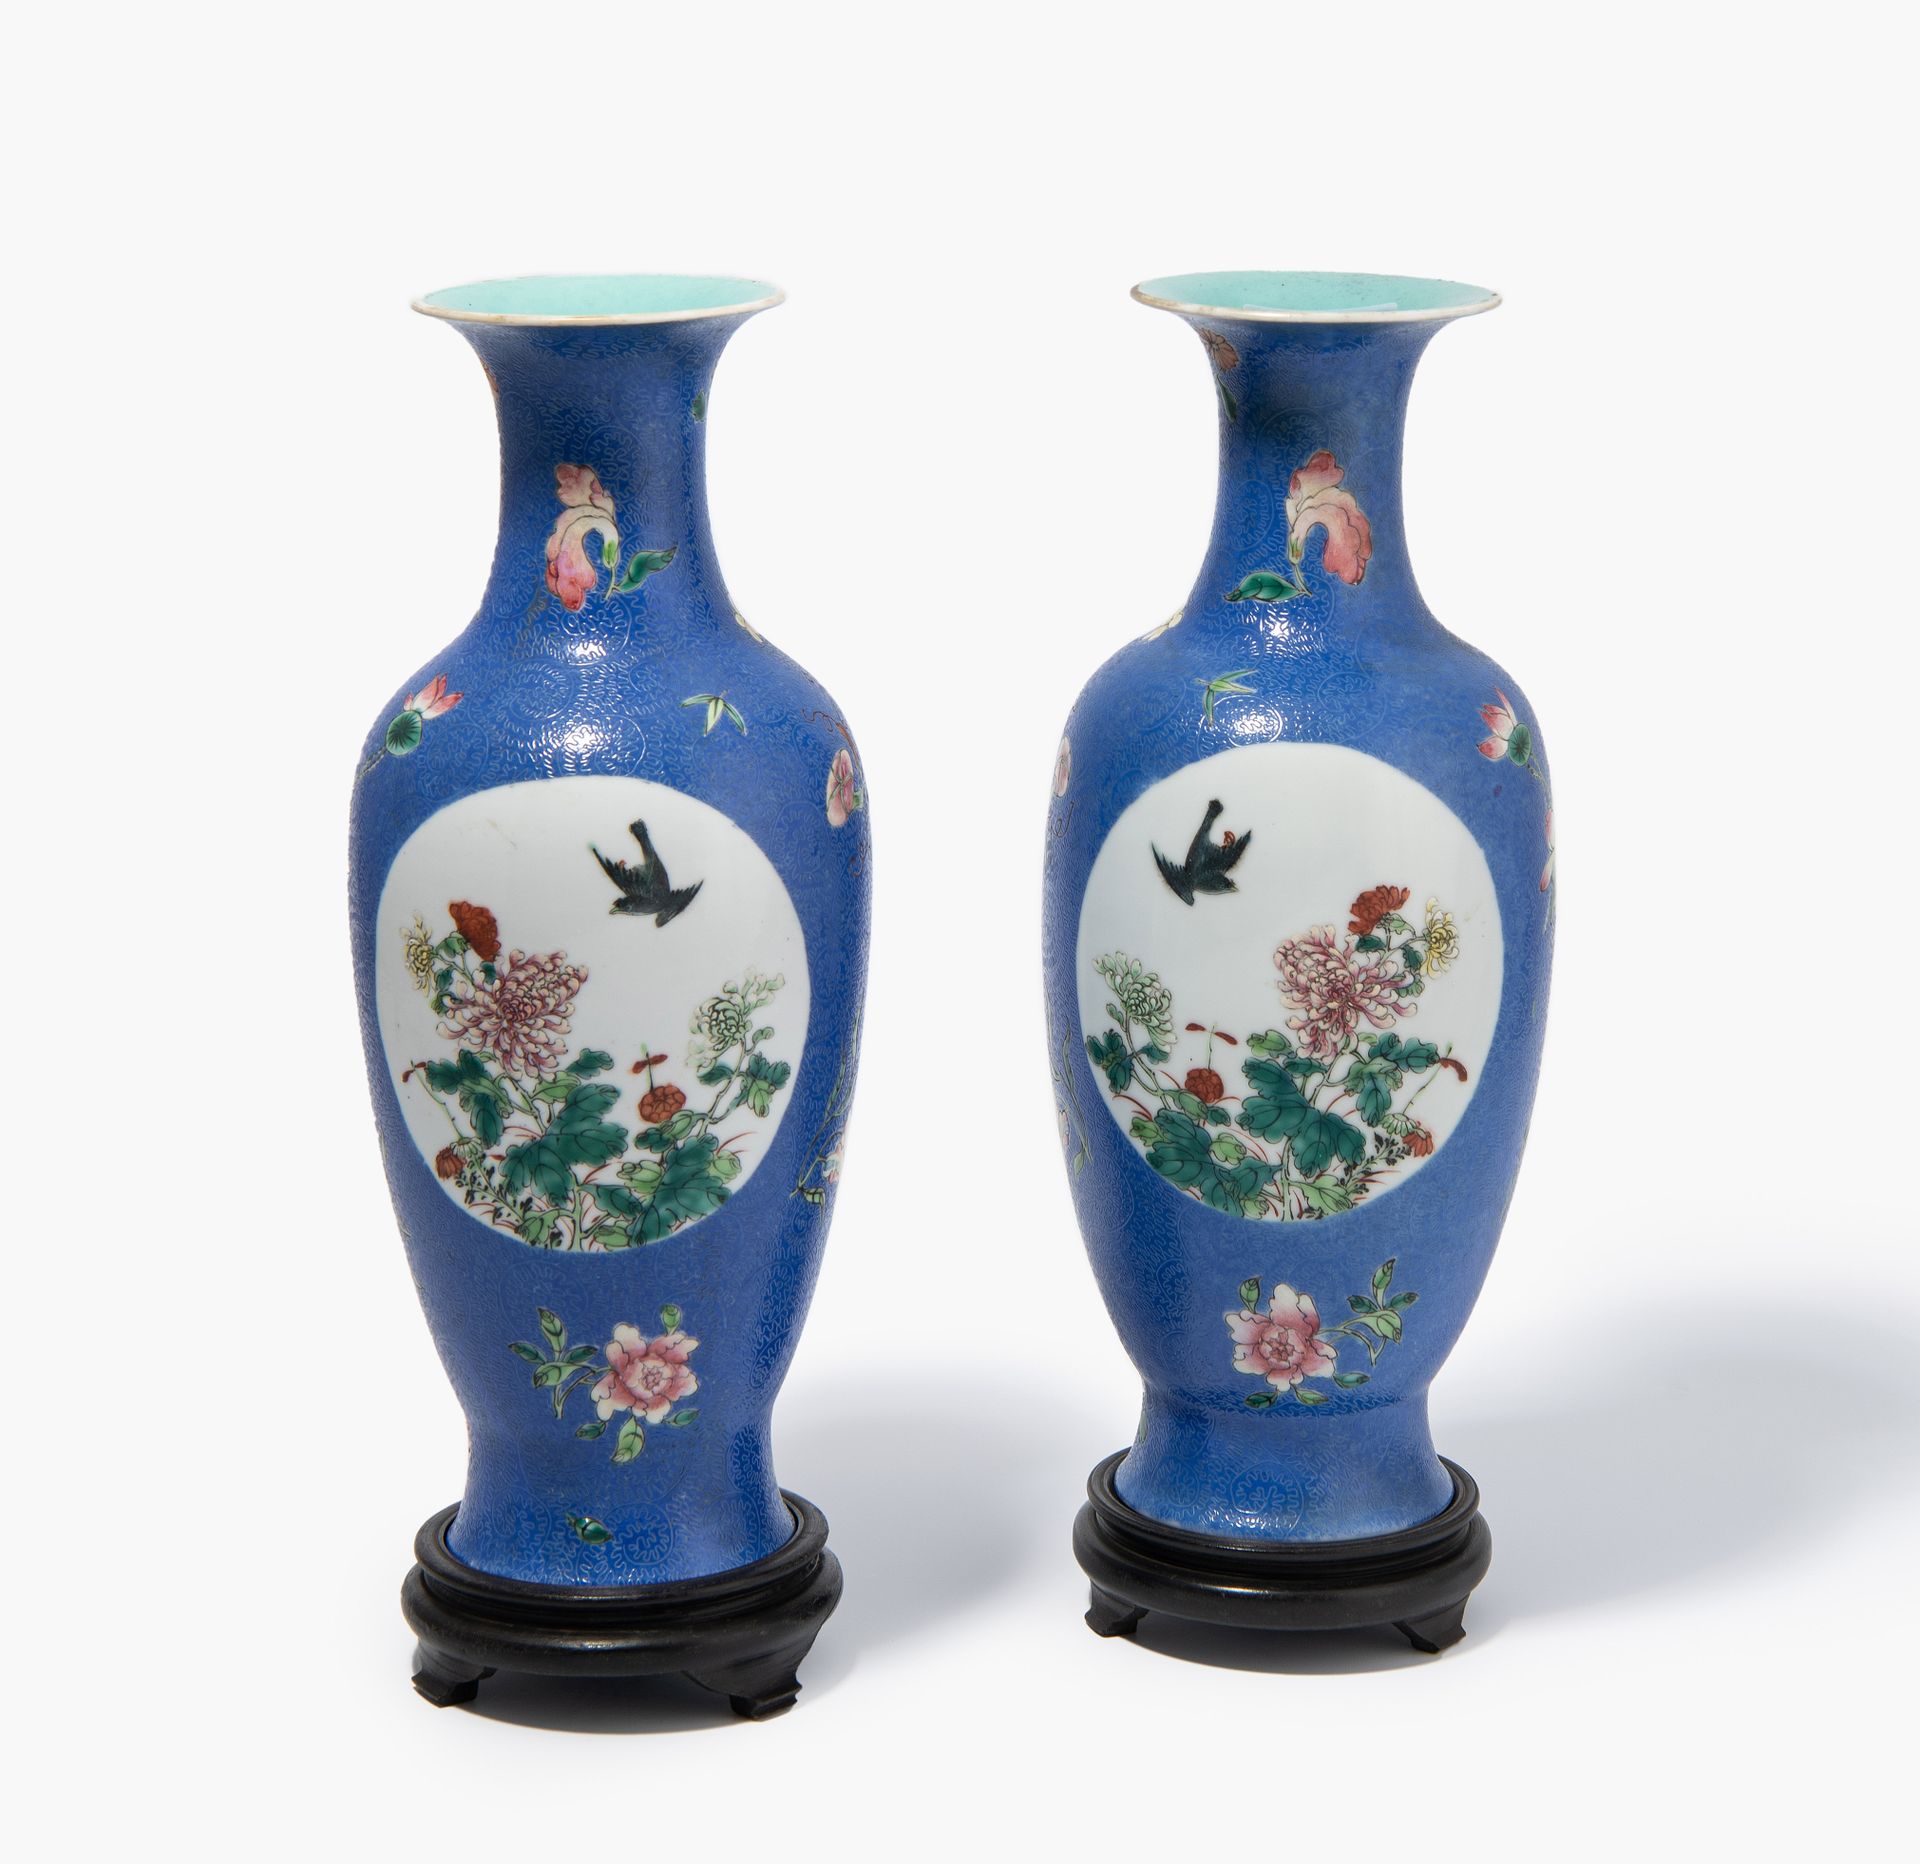 1 Paar Vasen 1 pair of vases
Cina, 19th/20th c. Porcelain. Iron red six-characte&hellip;